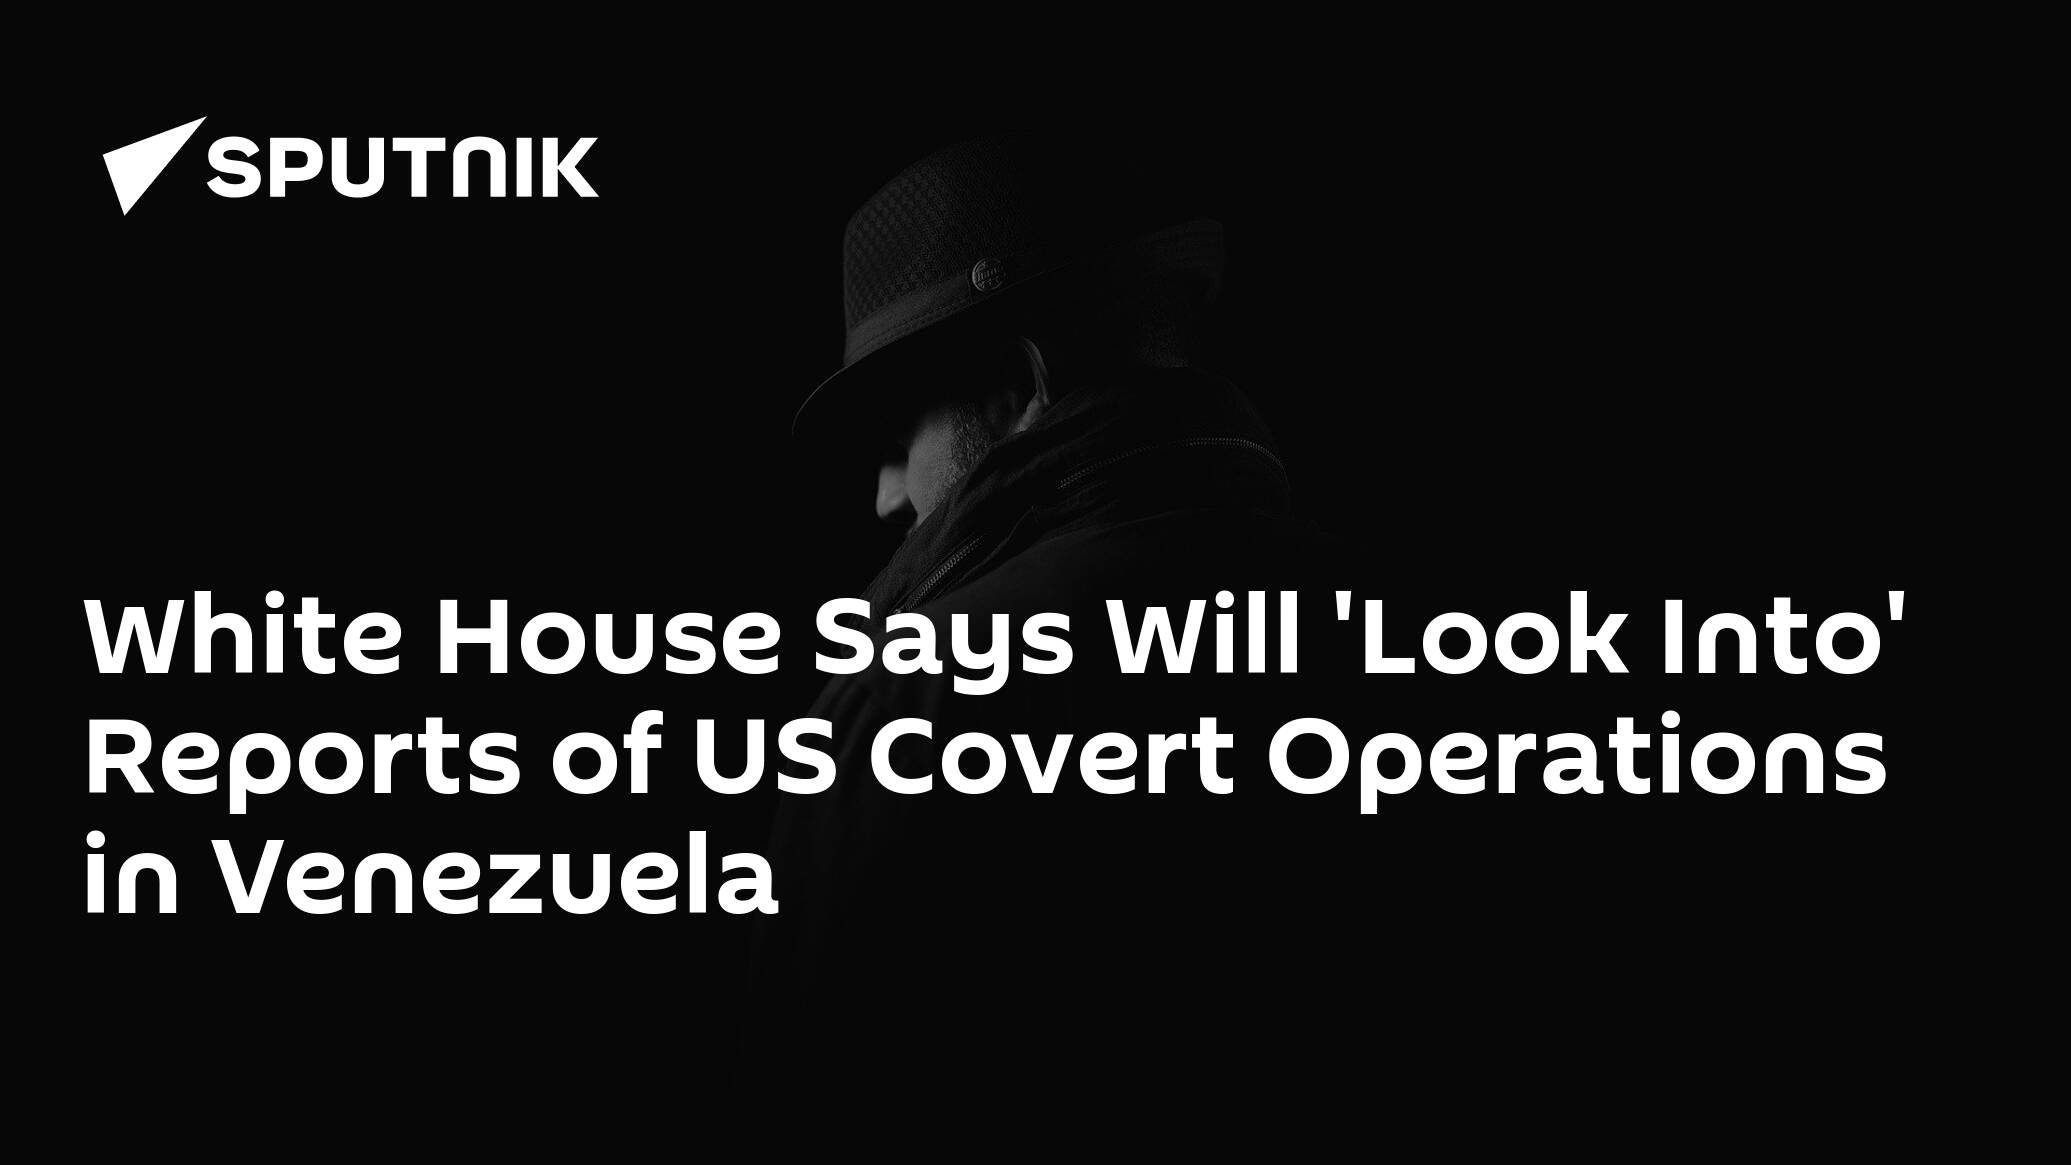 White House Says Will 'Look Into' Reports of US Covert Operations in Venezuela